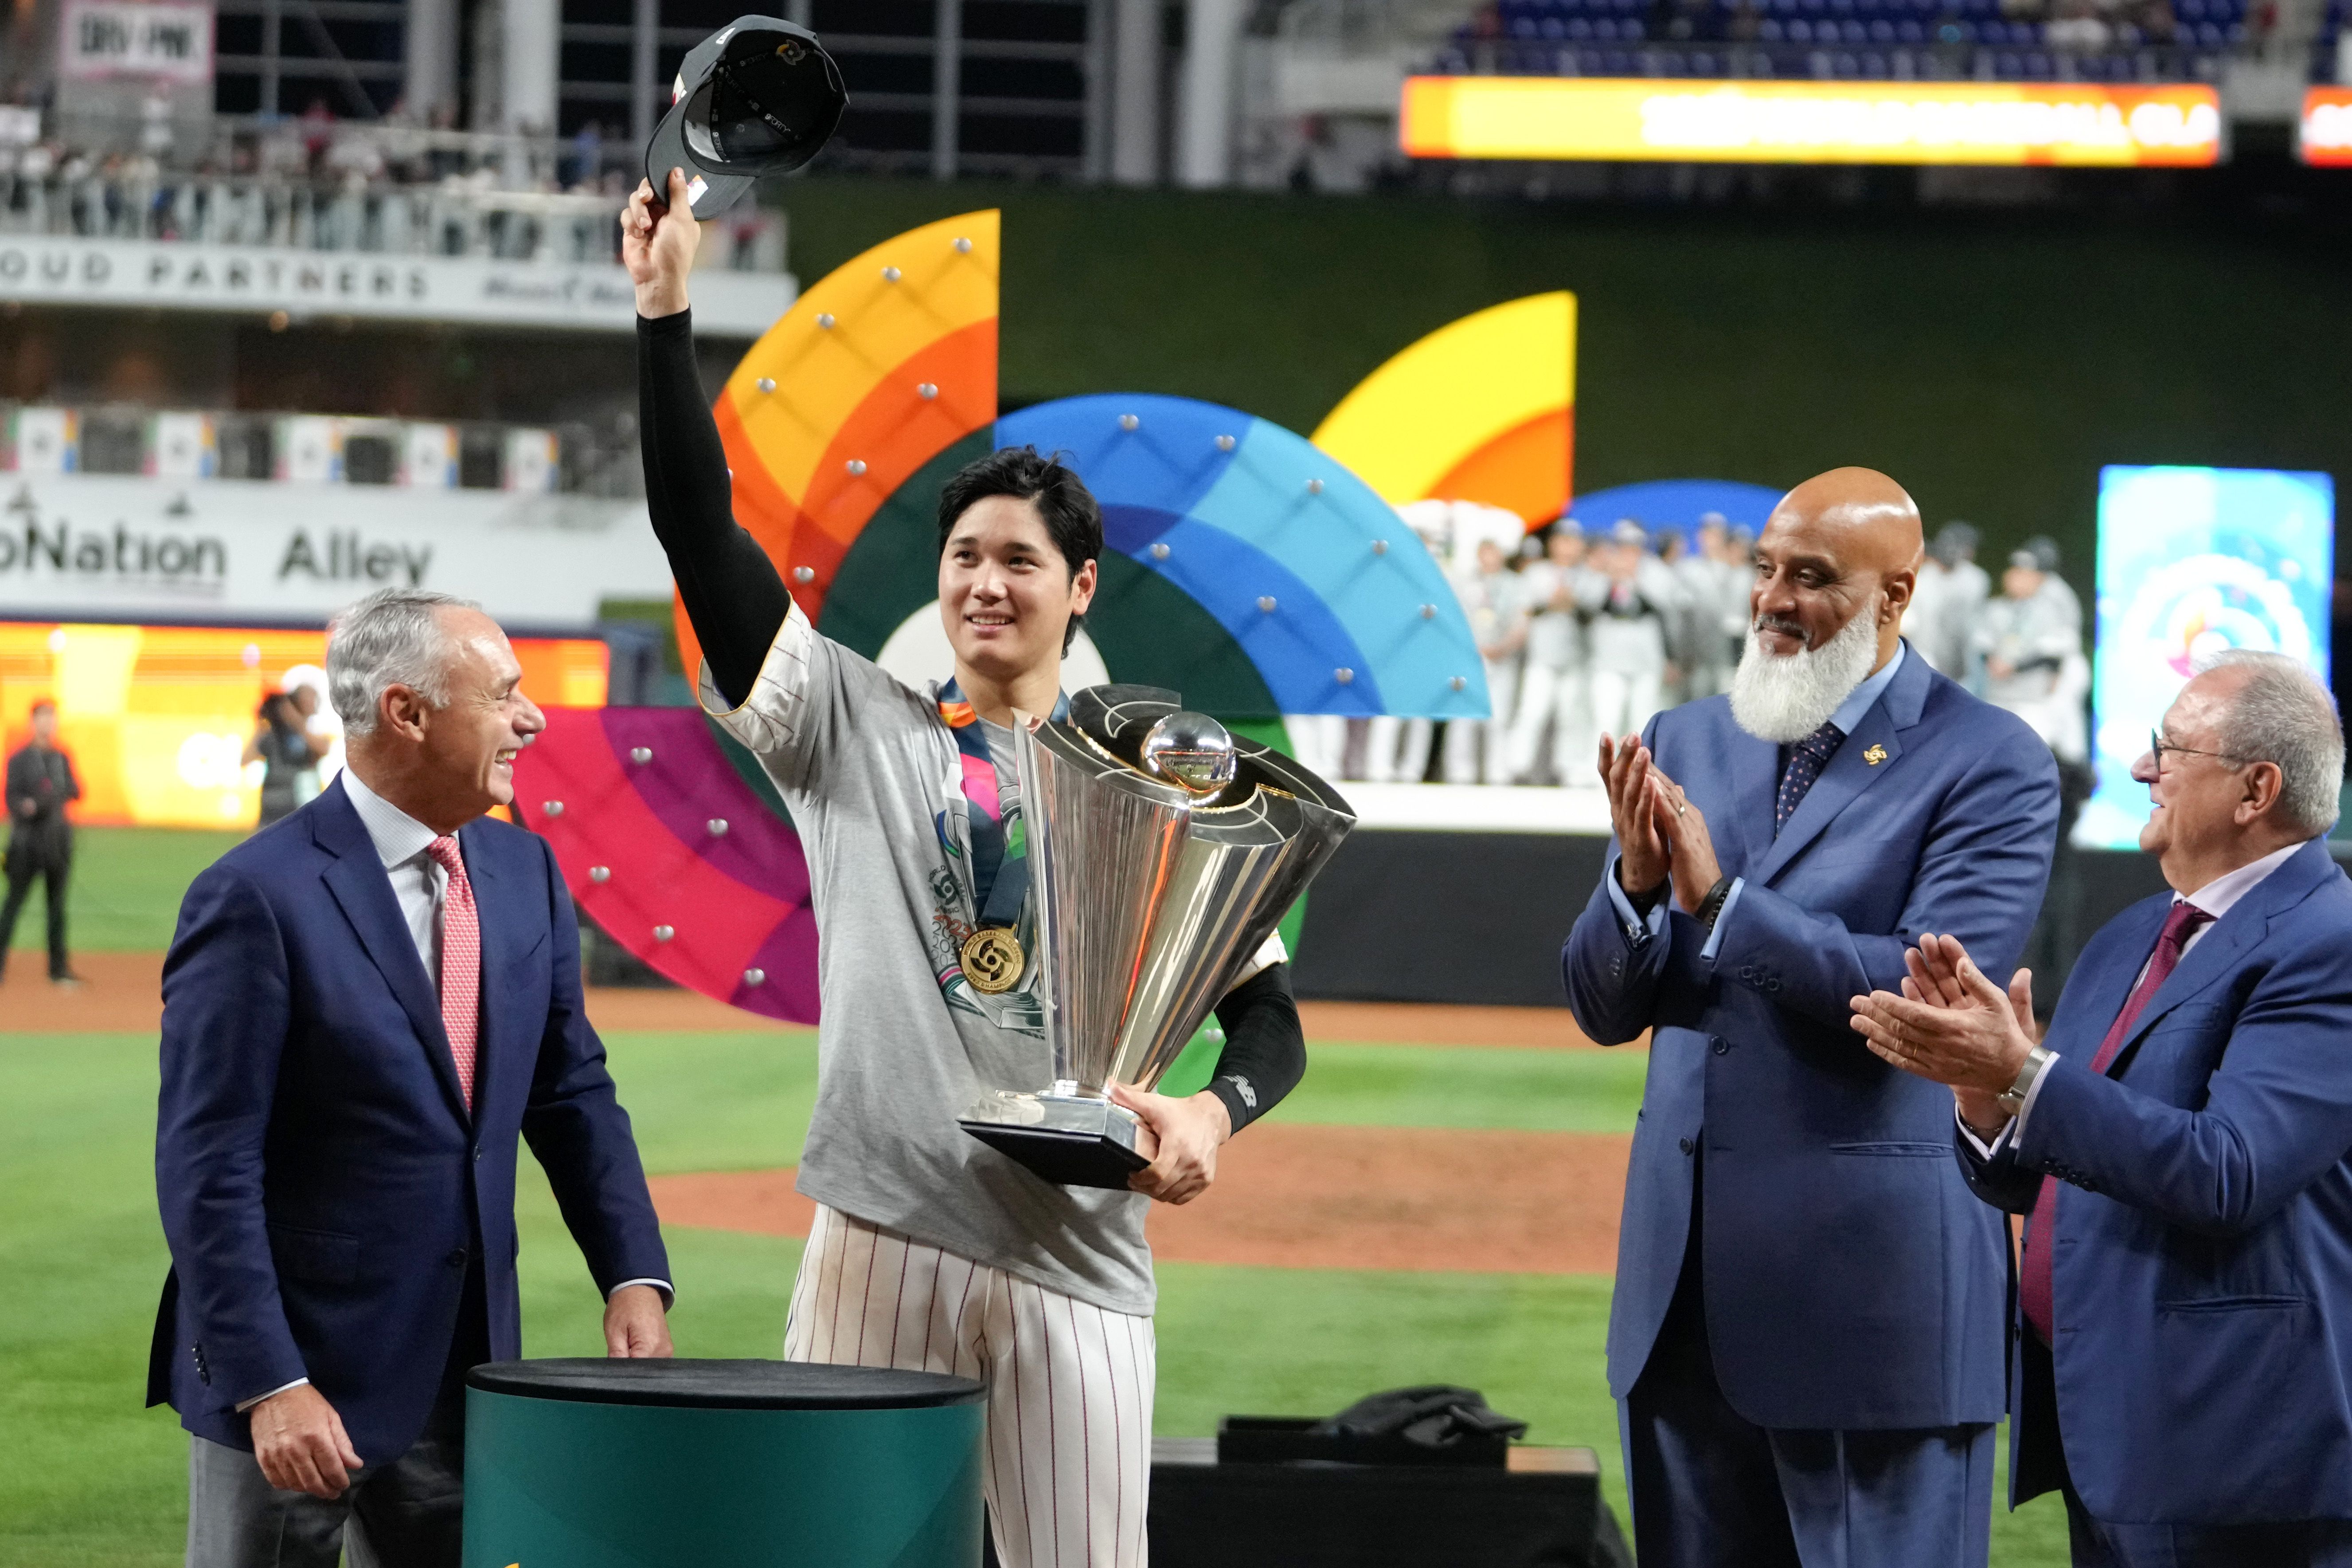 Shohei Ohtani #16 of Team Japan applauds fans after being awarded the MVP following Japan's World Baseball Classic Championship win at loanDepot park on March 21, 2023 in Miami, Florida. 